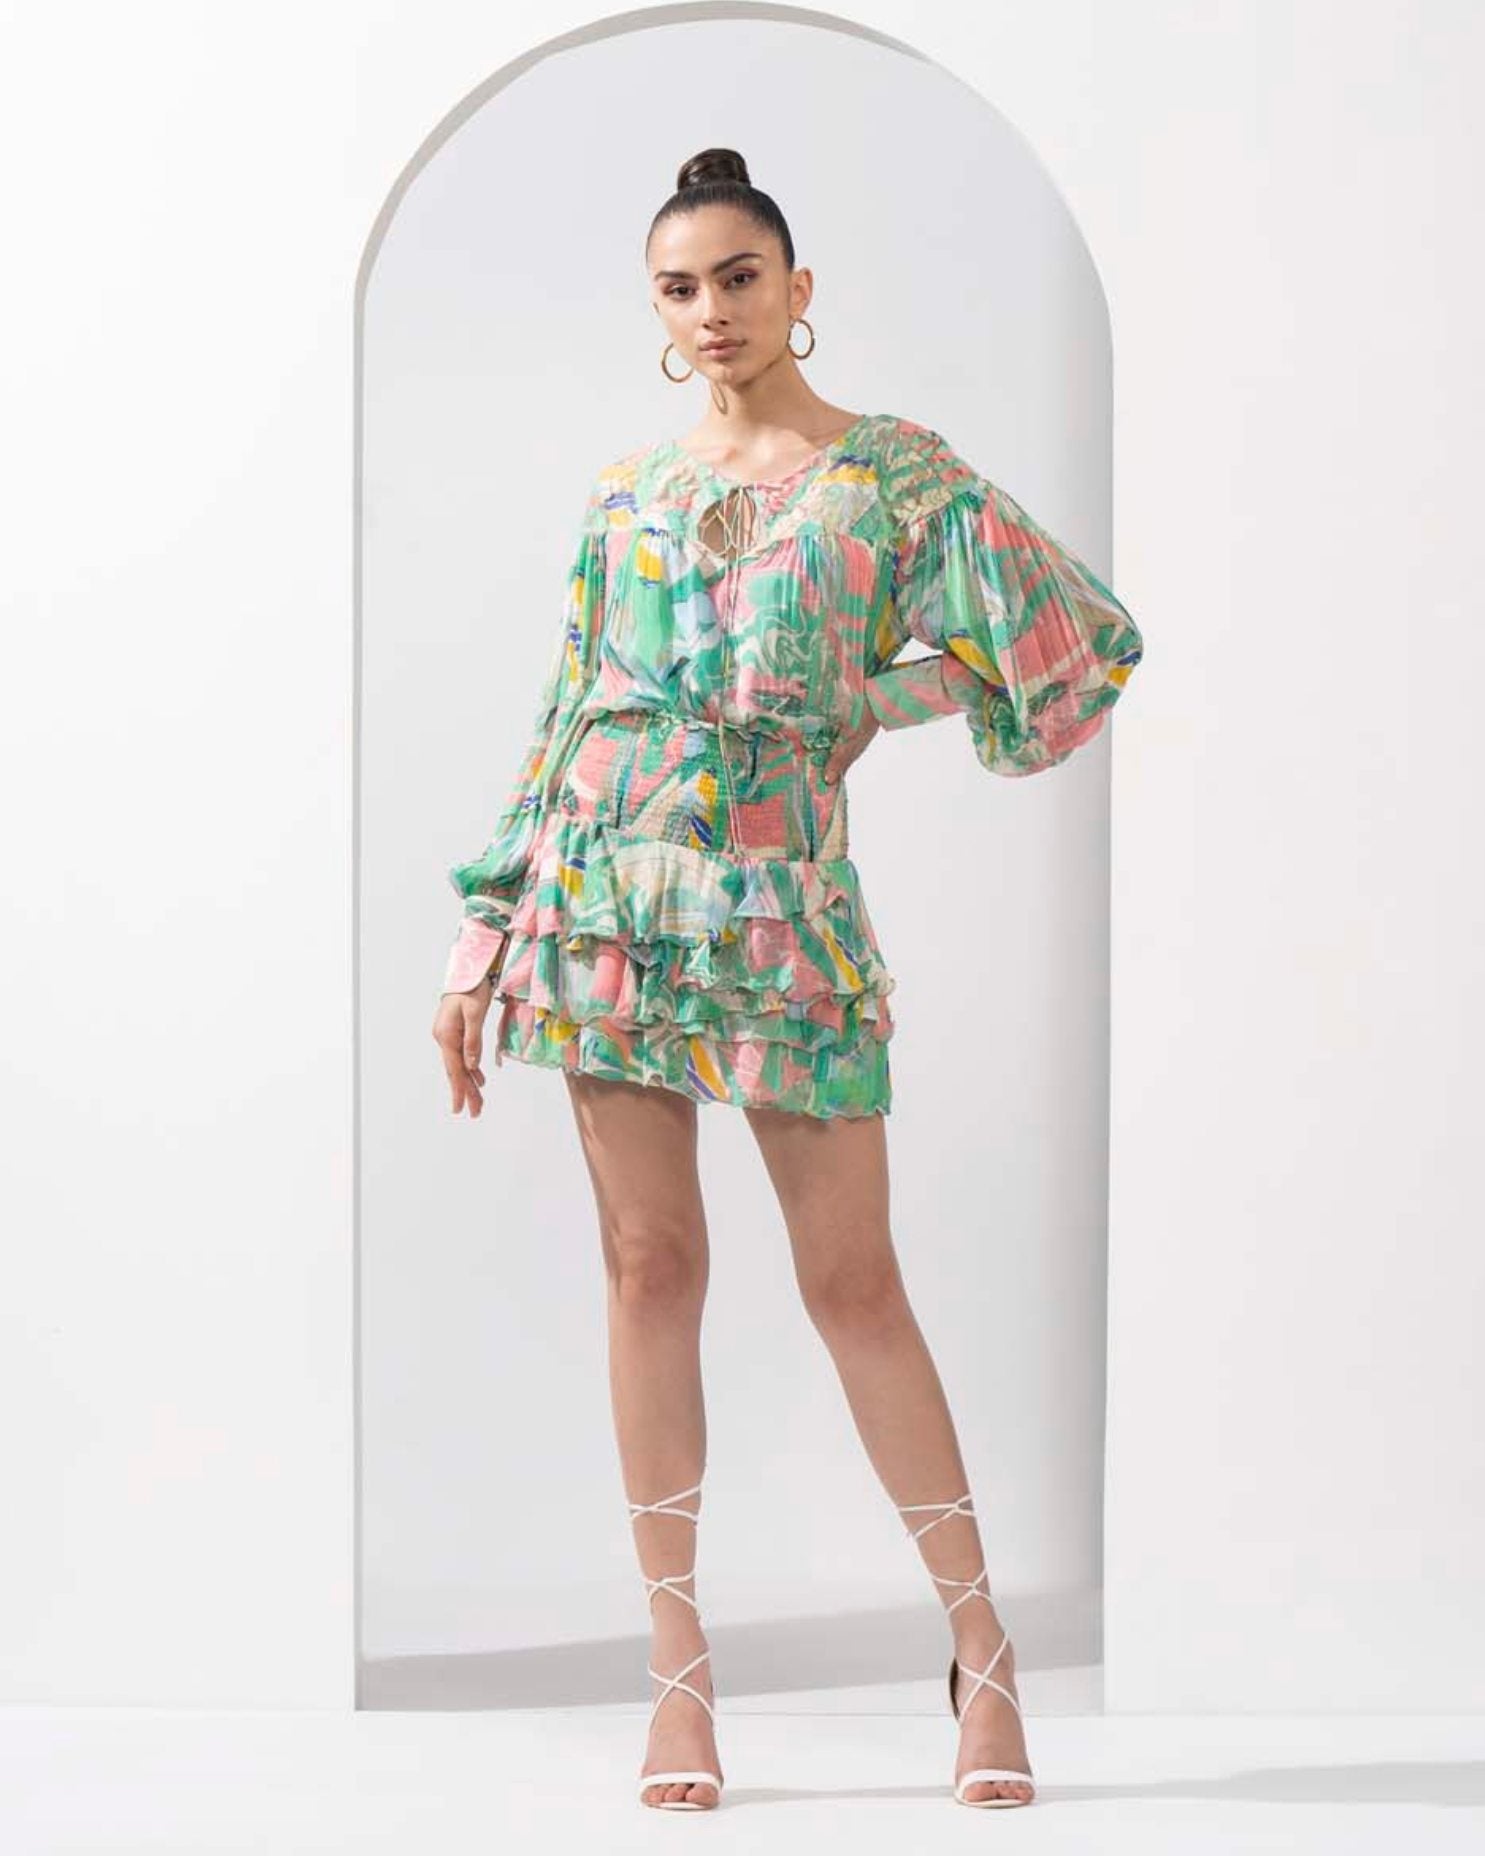 Mint & Pink abstract printed top & skirt chiffon set with cutwork chantley detailing.